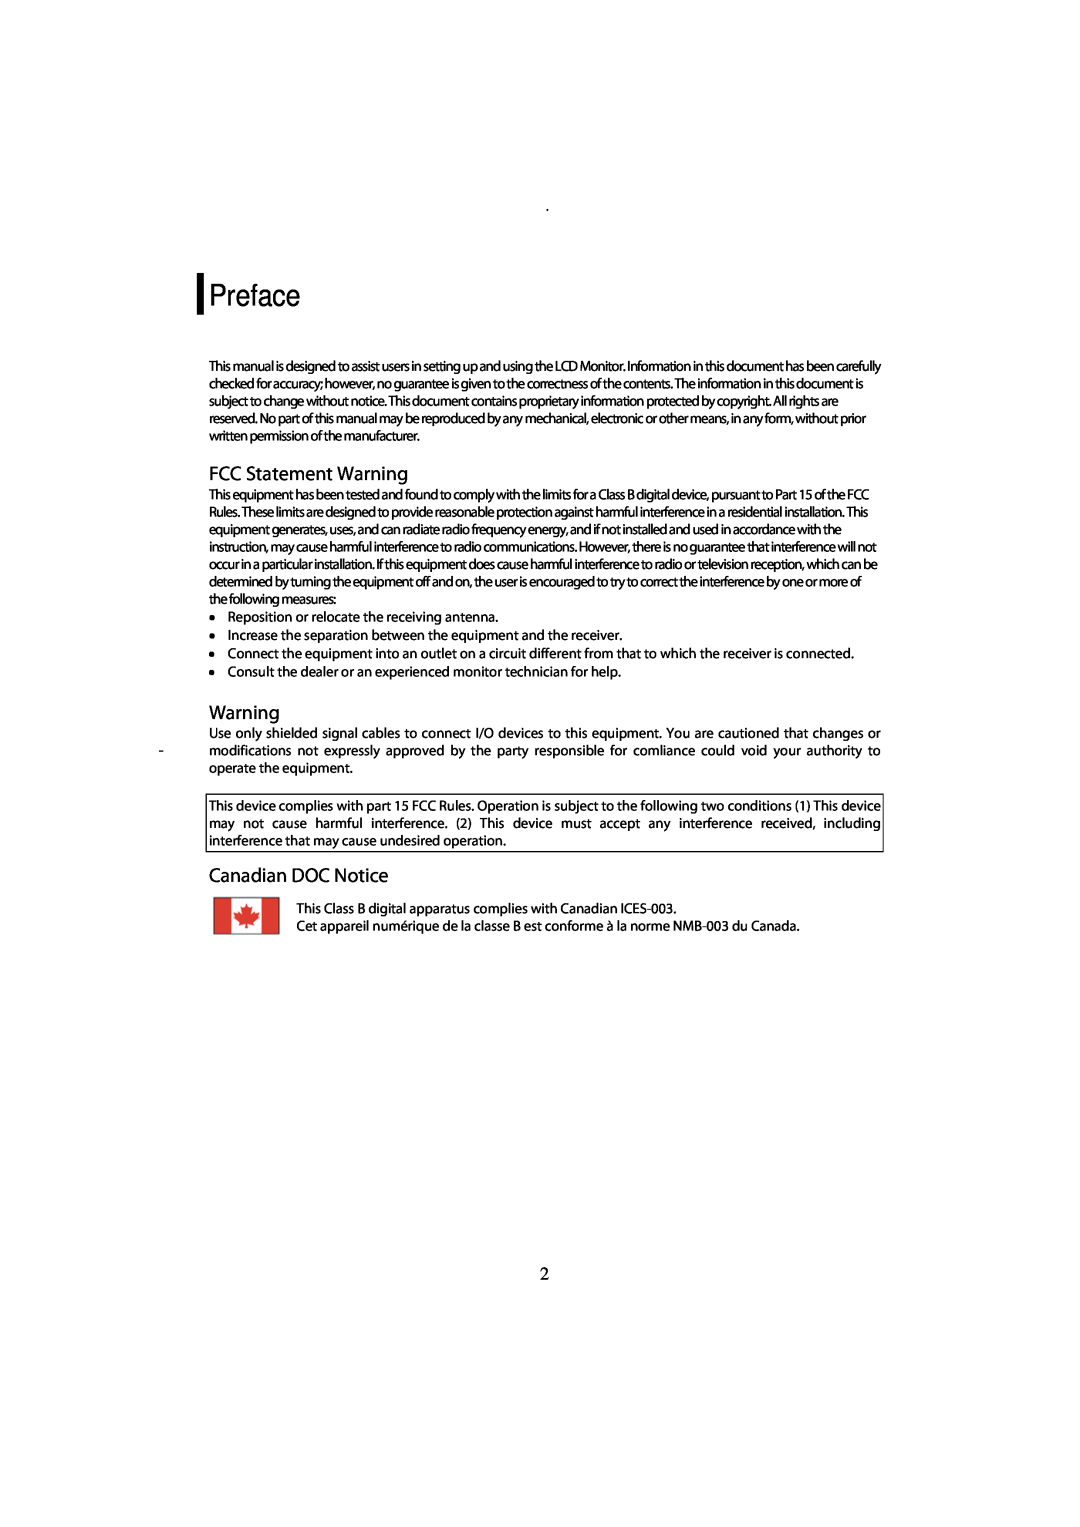 Planar PX2211MW manual Preface, FCC Statement Warning, Canadian DOC Notice 